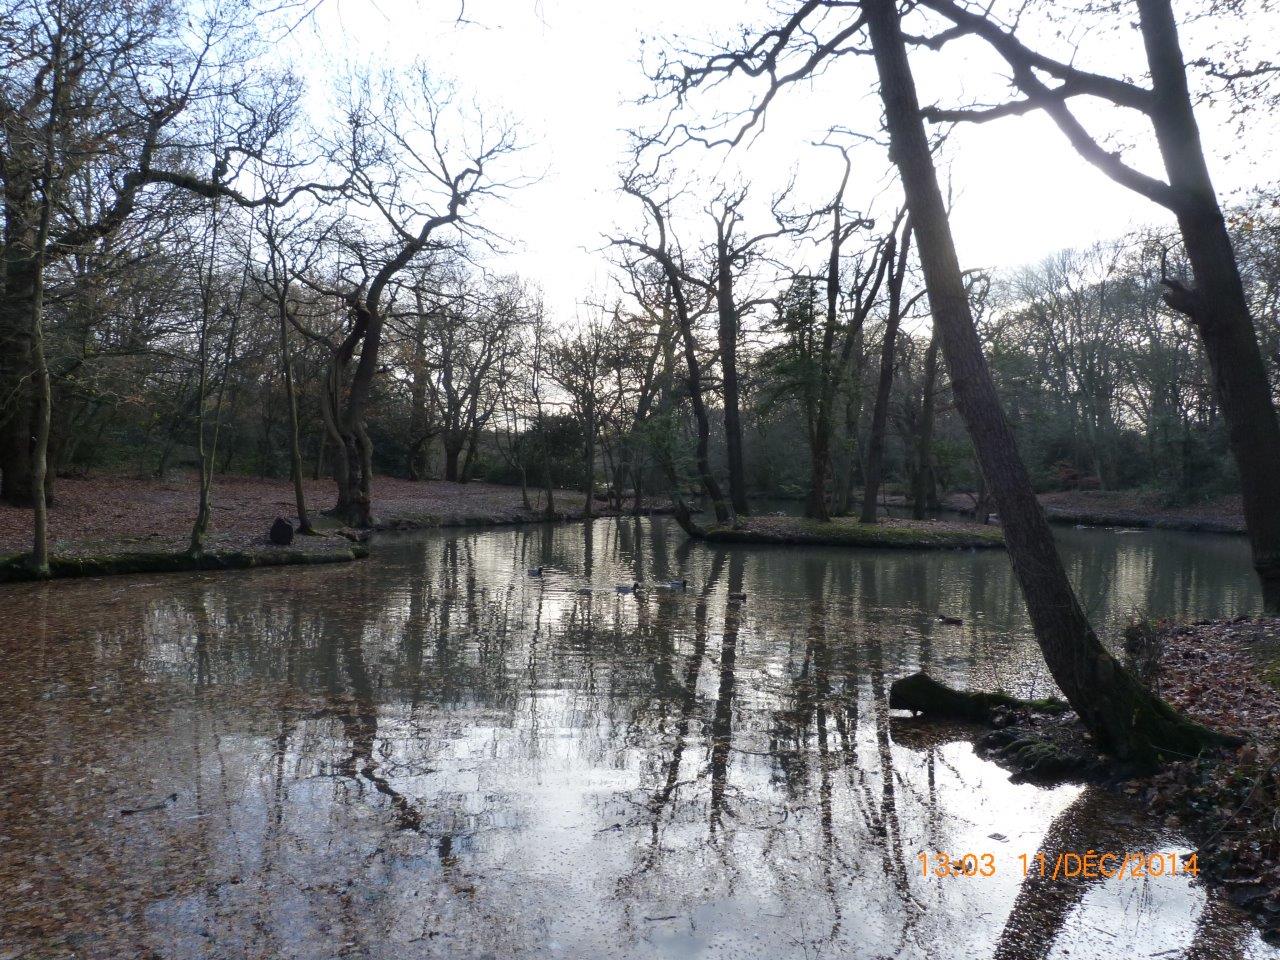 Highams Park Lake Dam Works update from the City Corporation – 12th December 2014